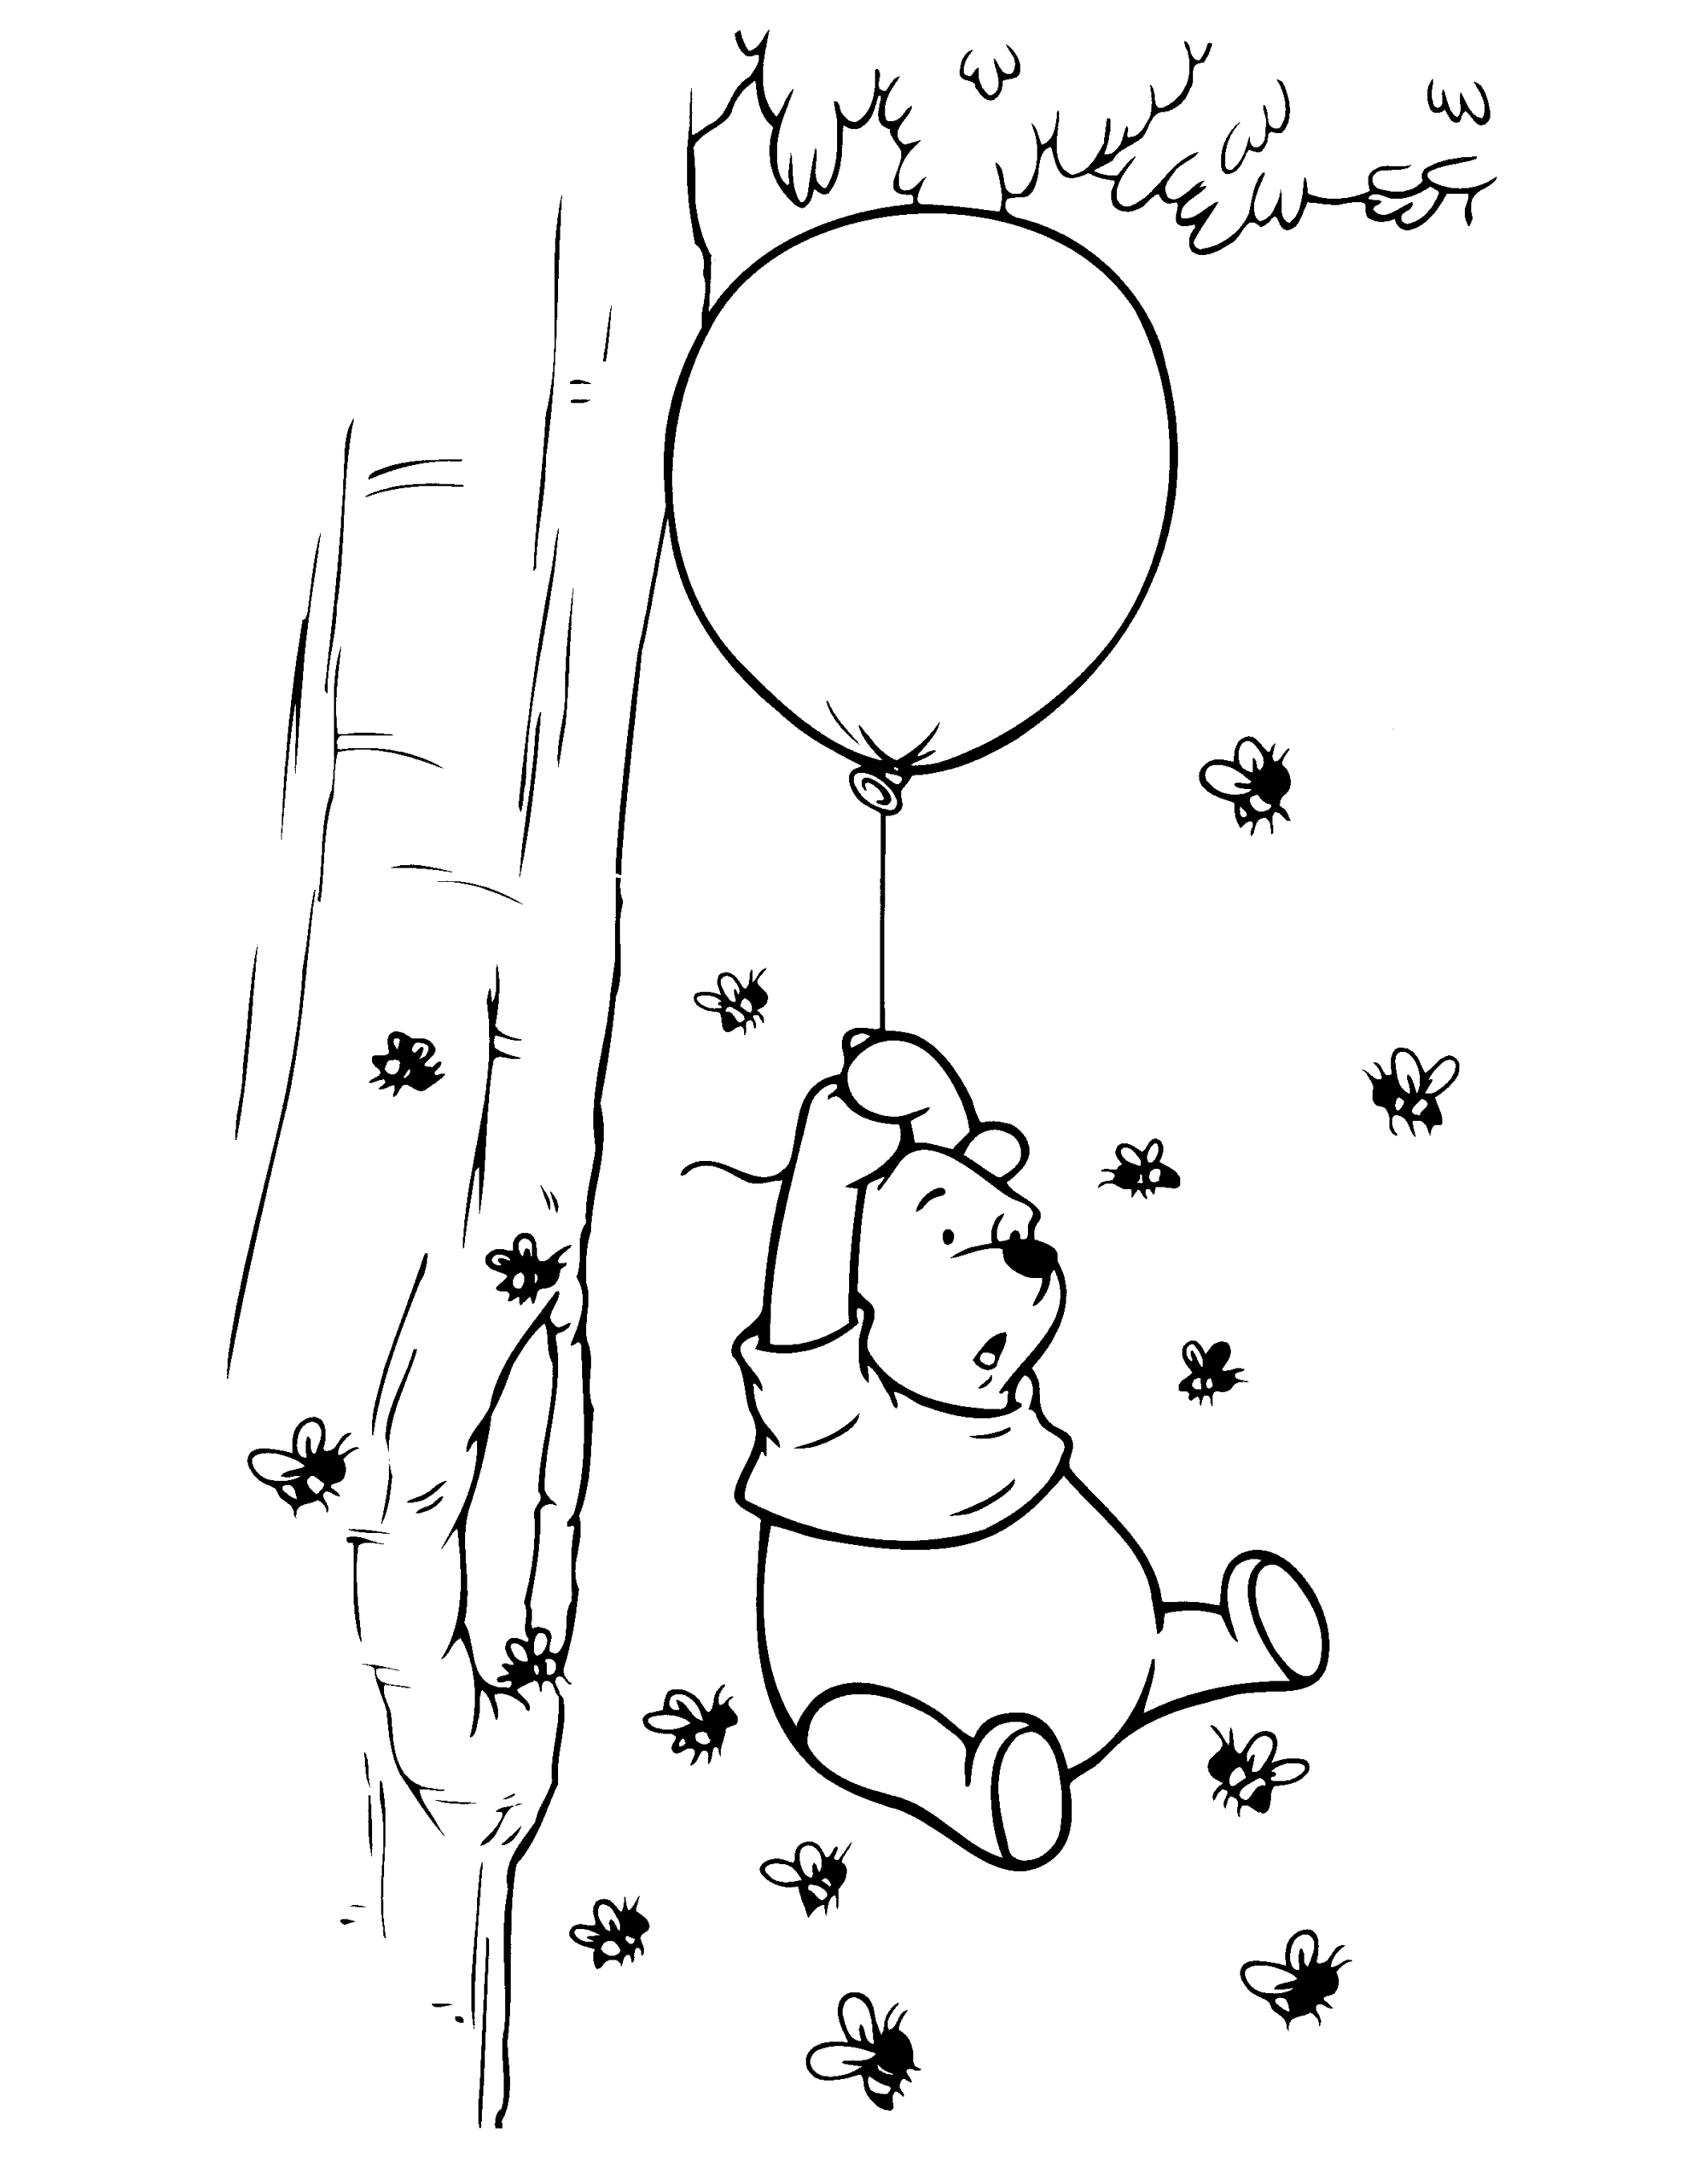 Winnie the Pooh Coloring Pages Cartoons winnie the pooh 81 Printable 2020 7202 Coloring4free